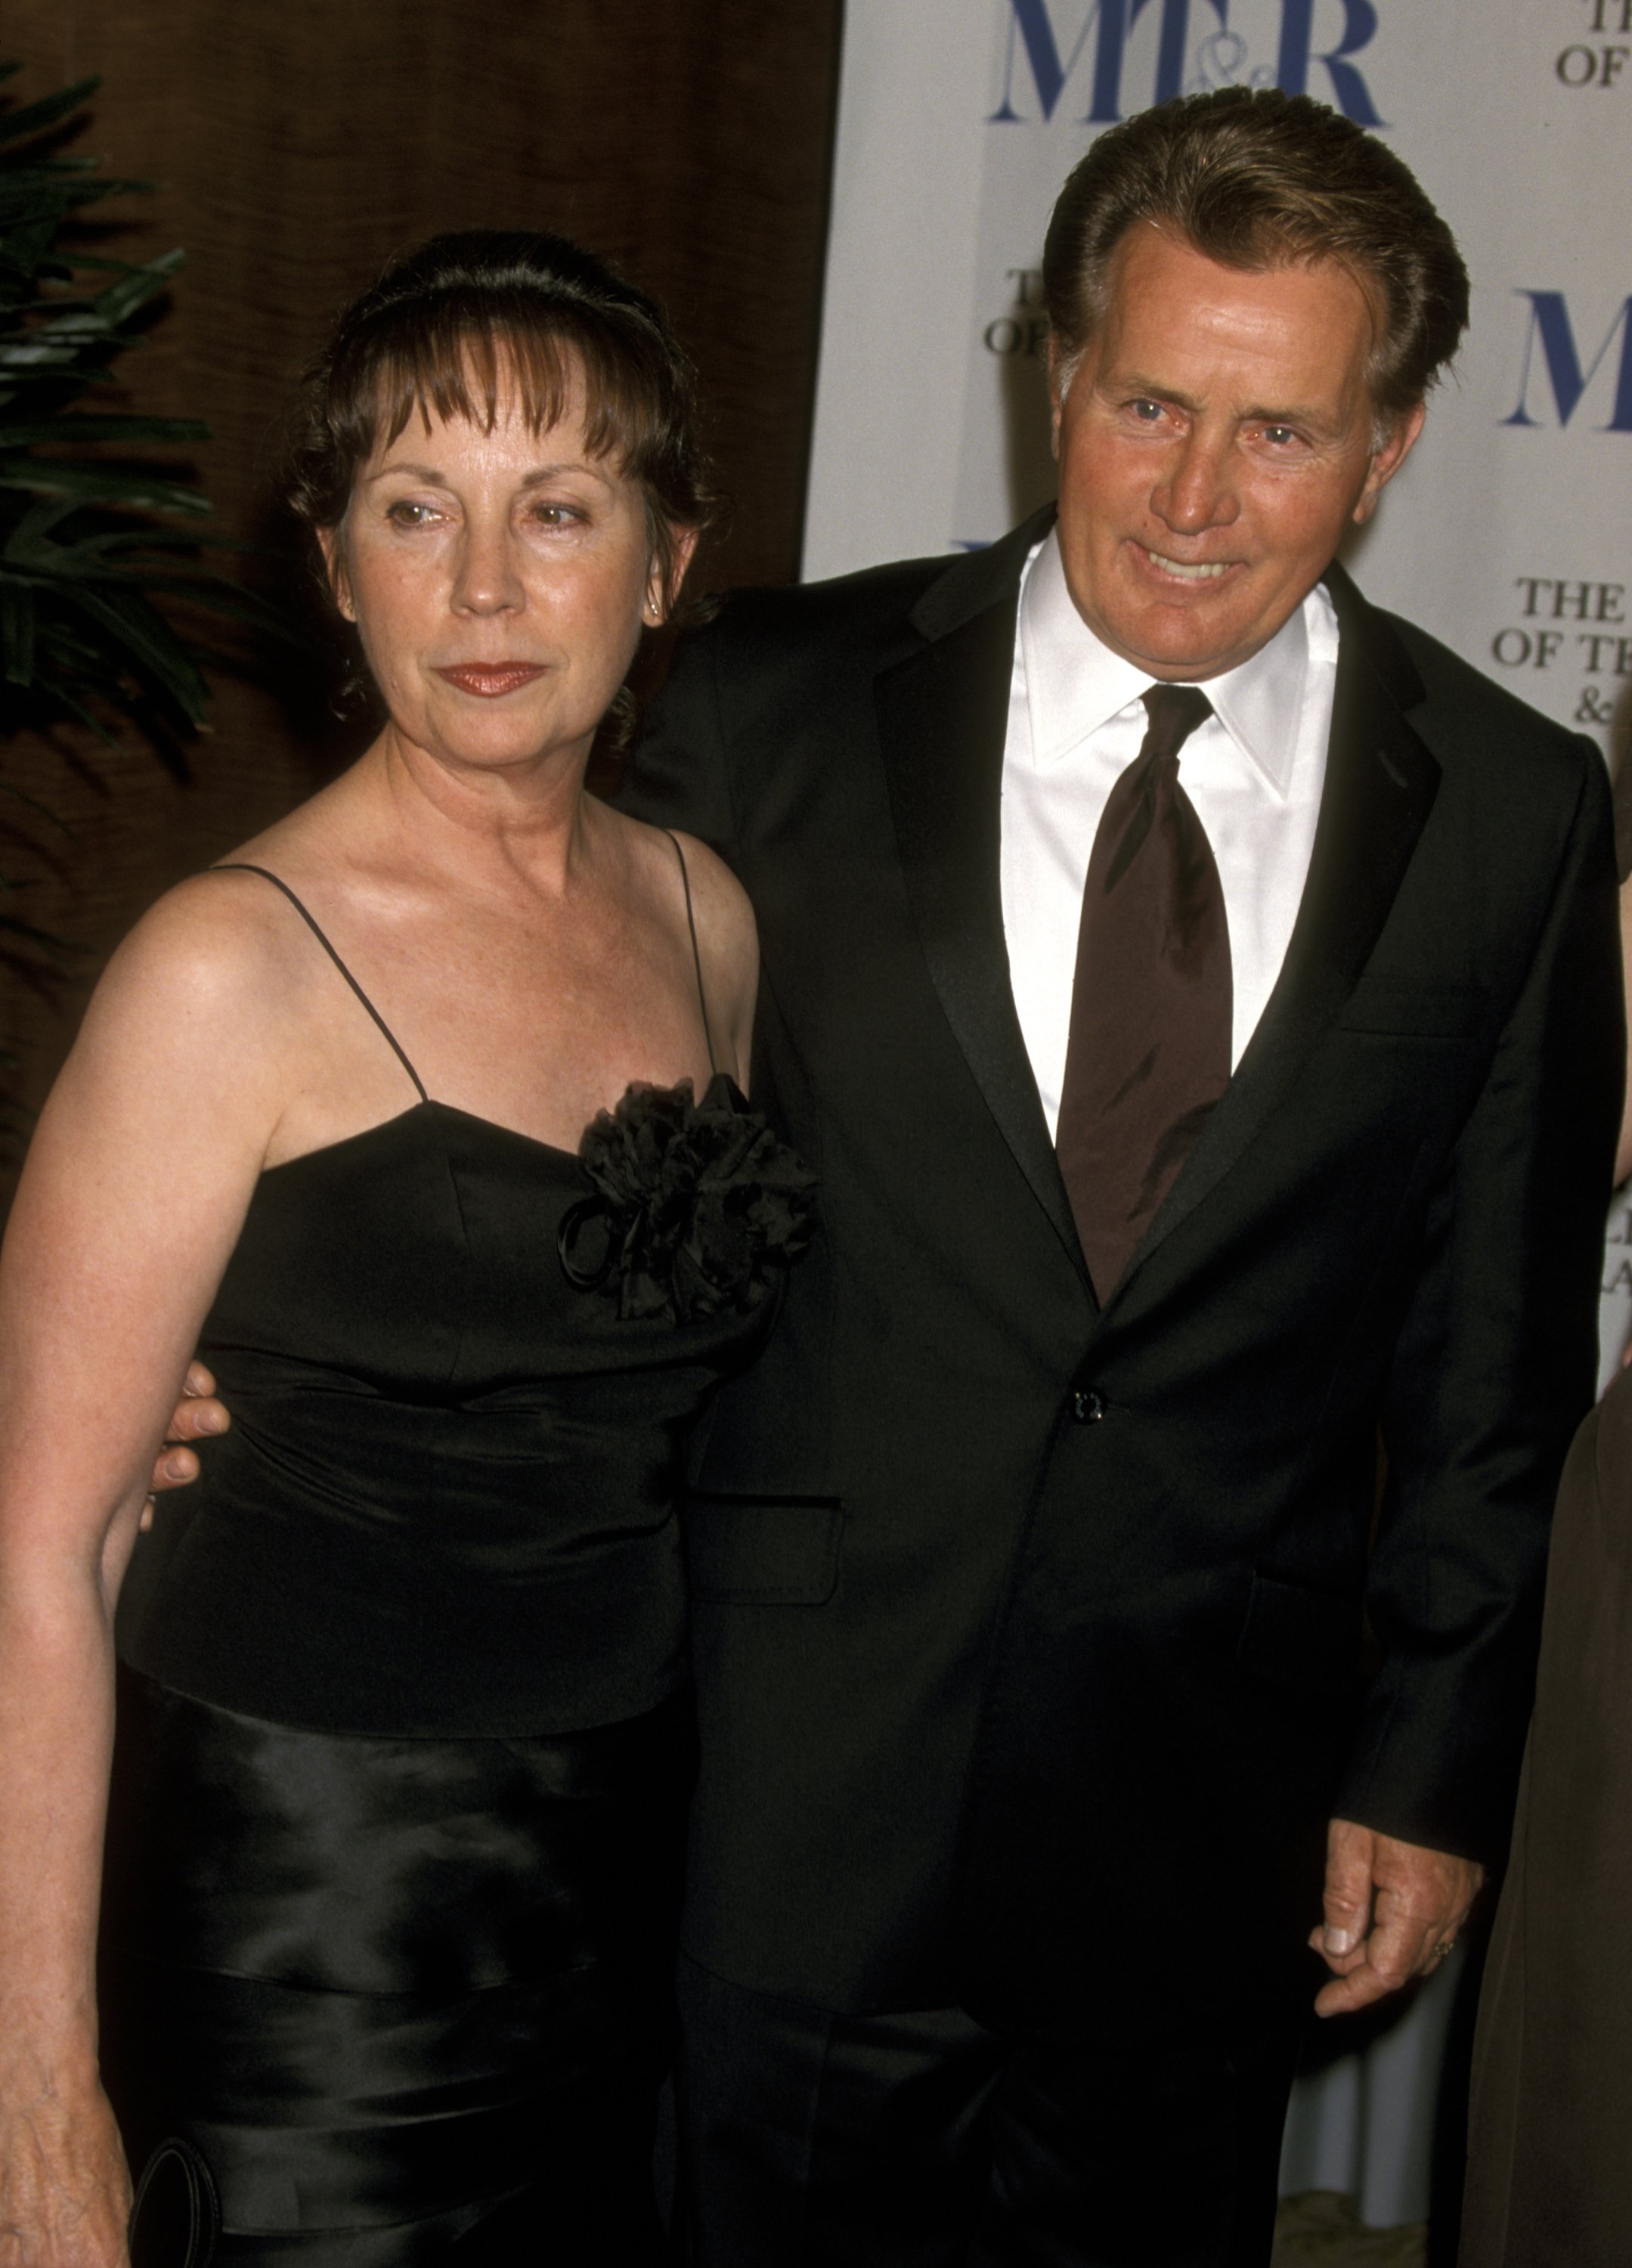 Martin Sheen and his wife Janet Sheen during The Museum of Television & Radio's Annual Gala at The Beverly Hills Hotel in Beverly Hills, California. / Source: Getty Images